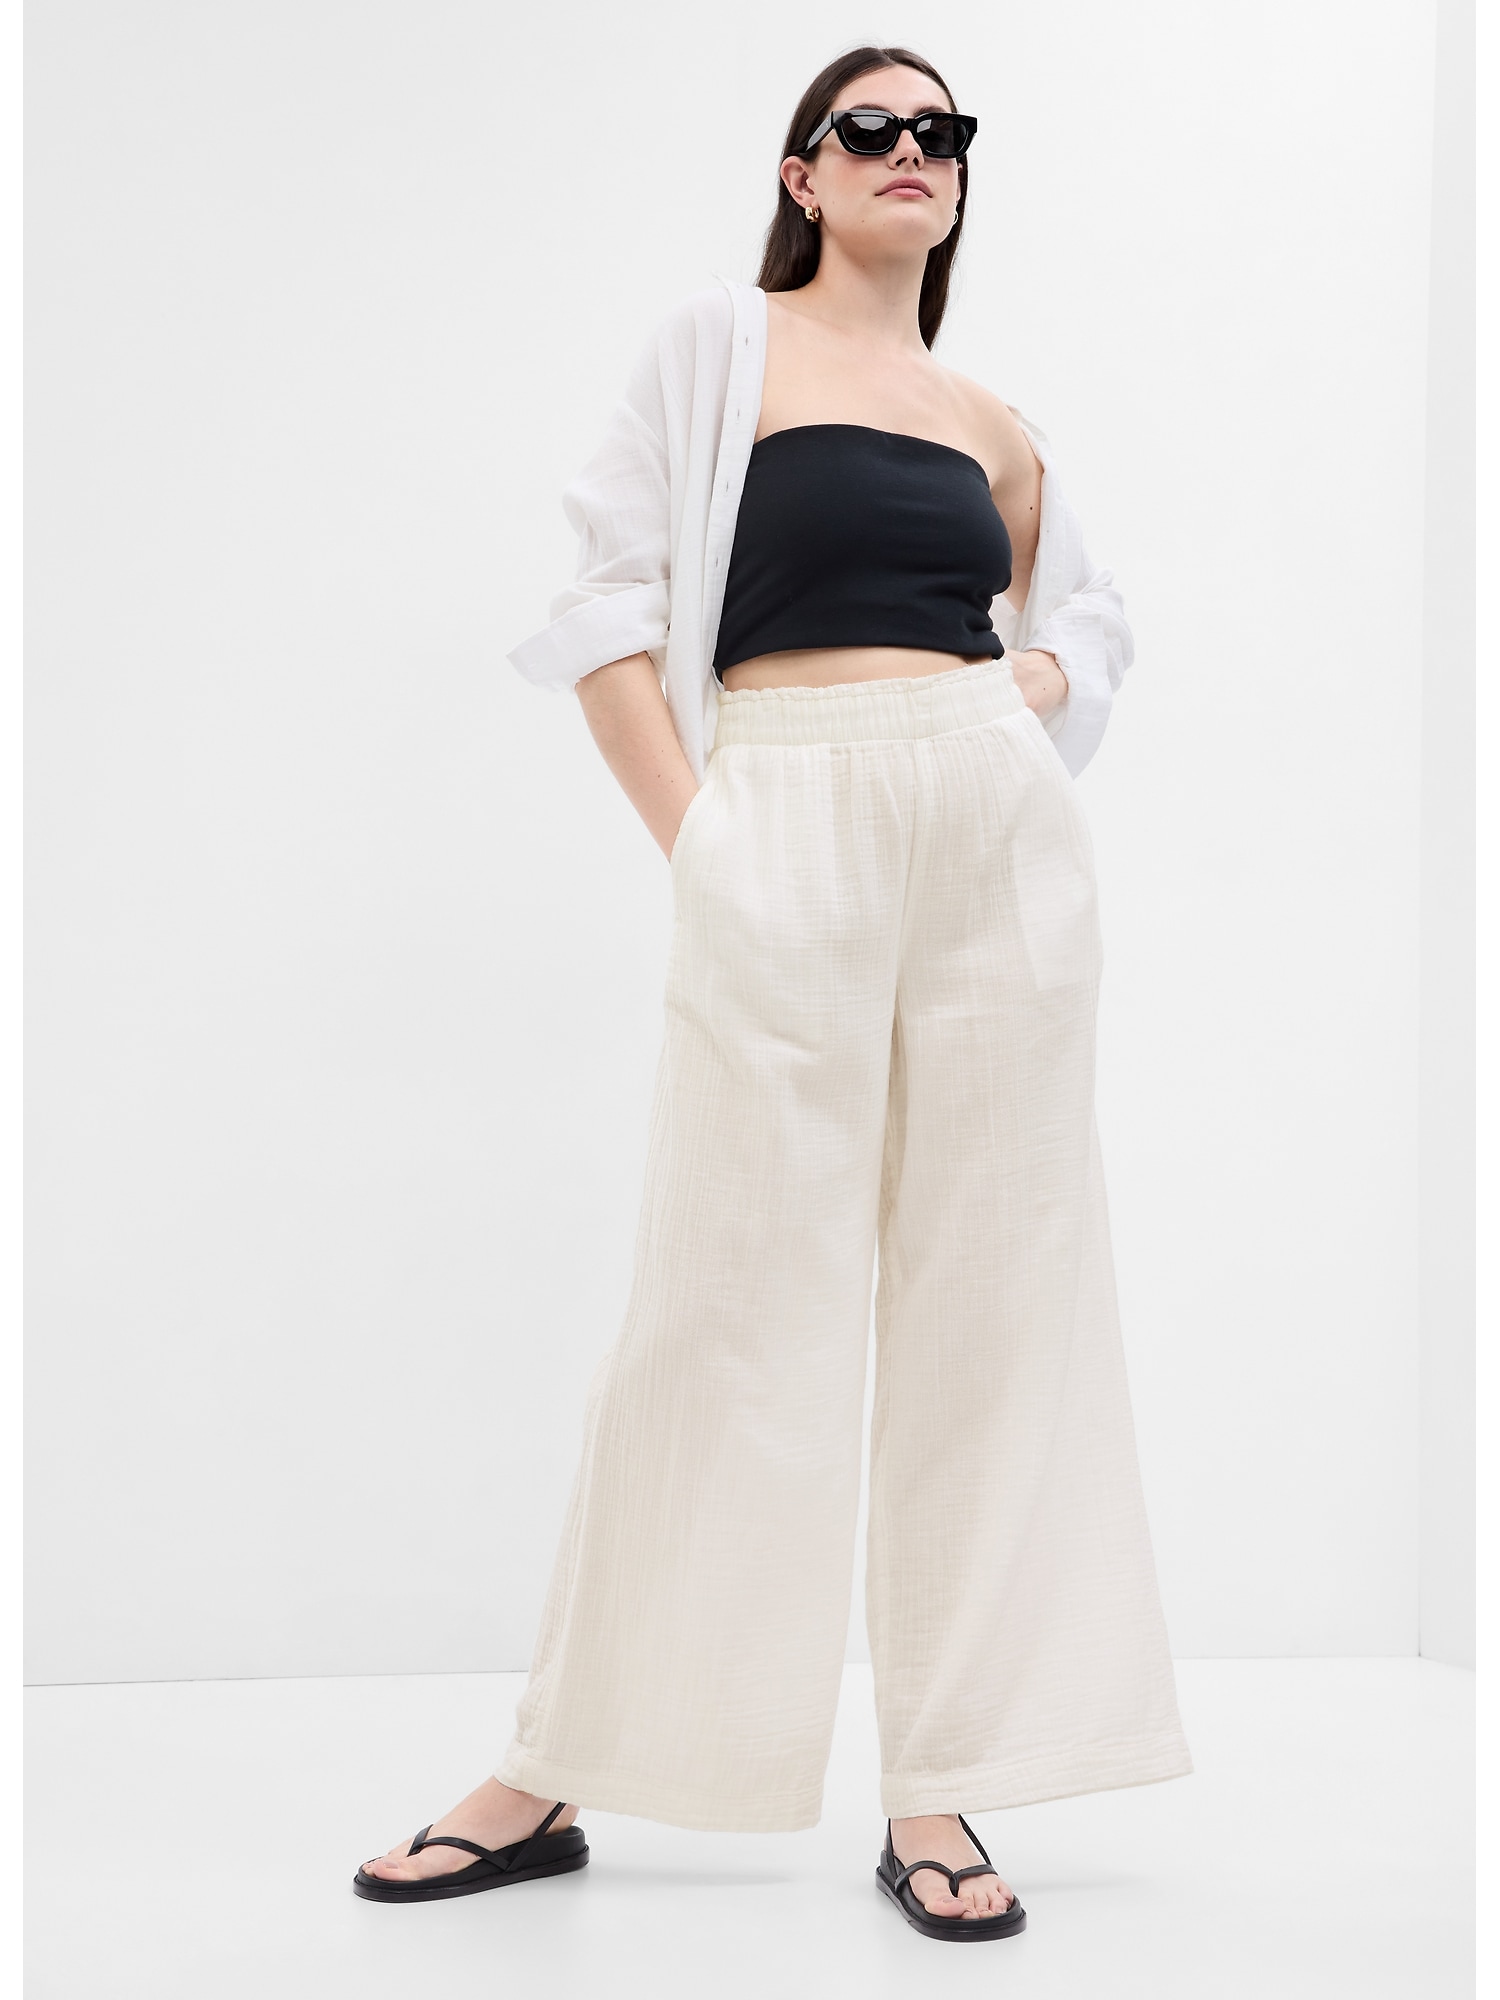 Obsessed: Gap Cotton-Gauze Wide-Leg Pants For Summer - The Mom Edit